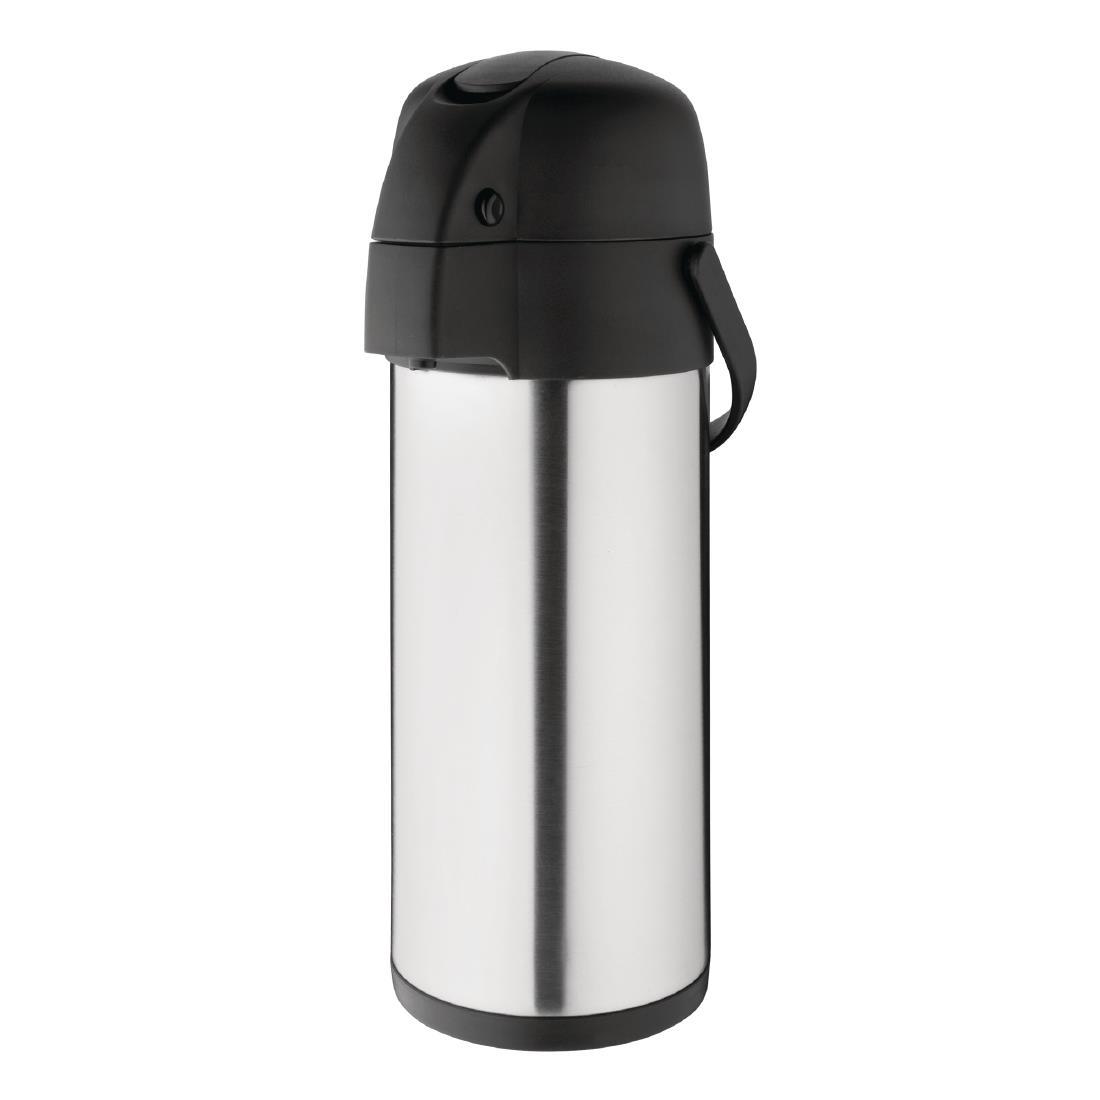 Olympia Lever Action Airpot 4Ltr - DL166  - 1